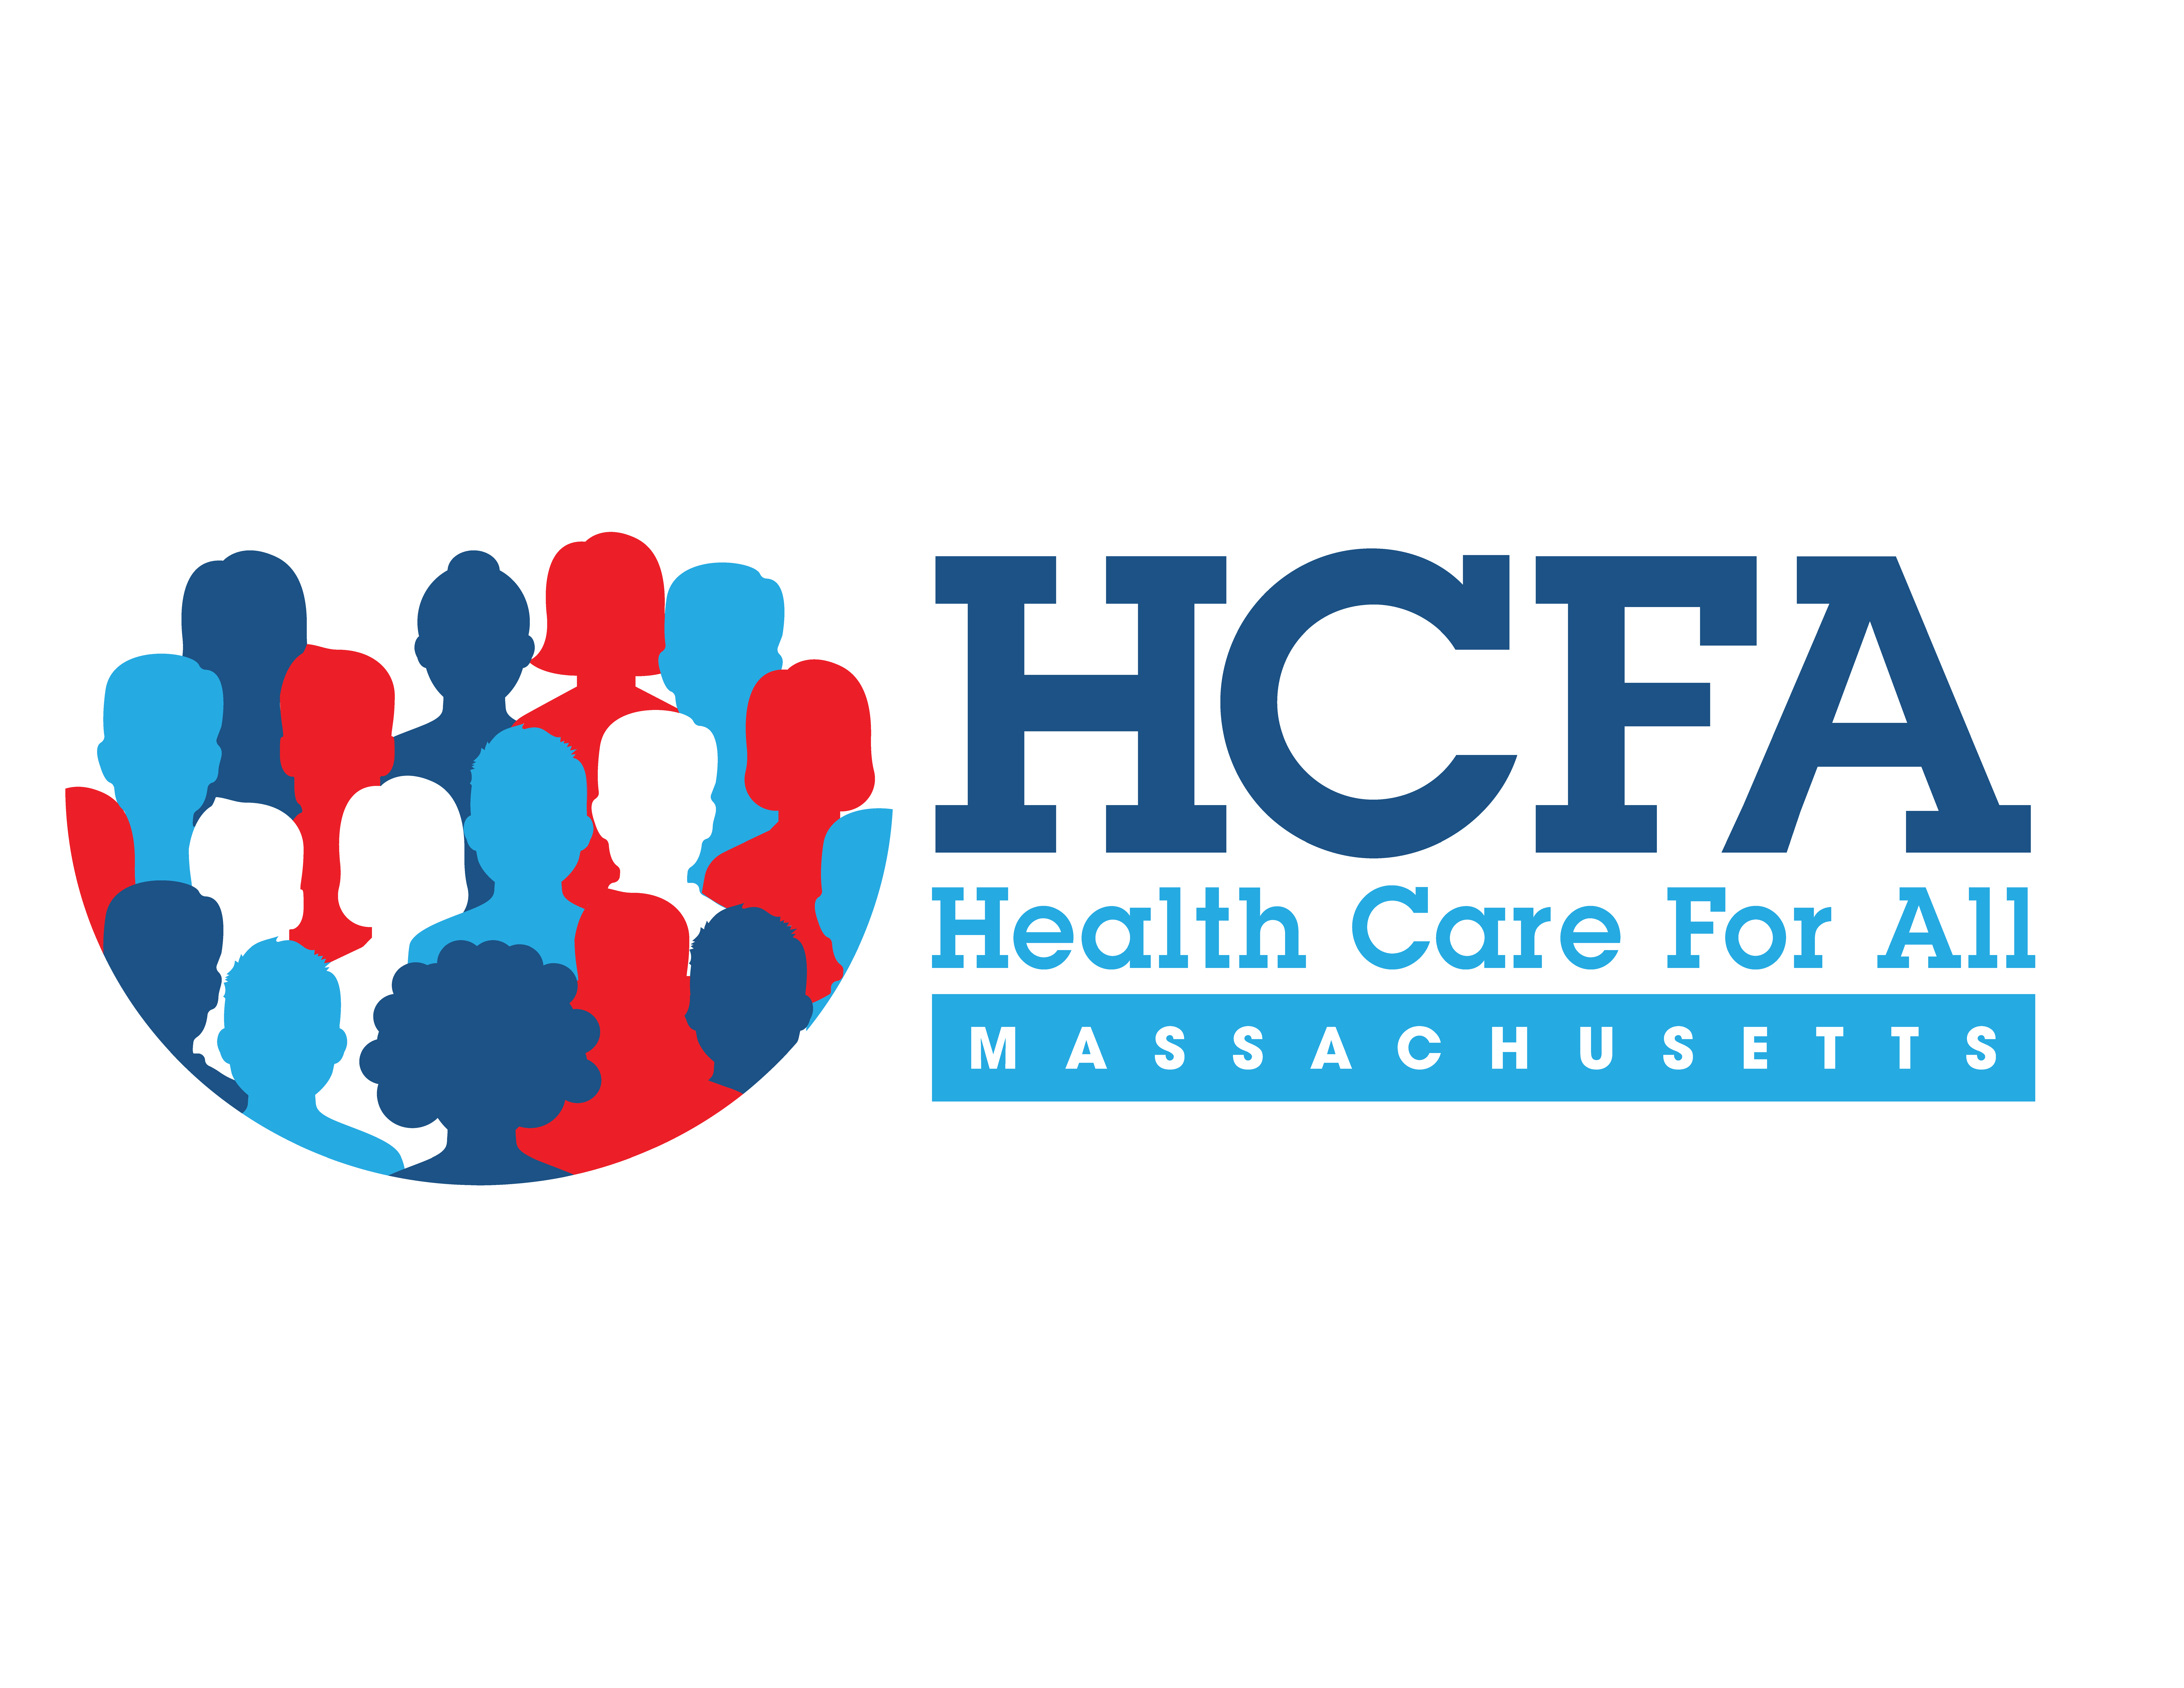 PRESS STATEMENT: Health Care For All Condemns Governor Baker’s Decision to Block Vital ConnectorCare Expansion